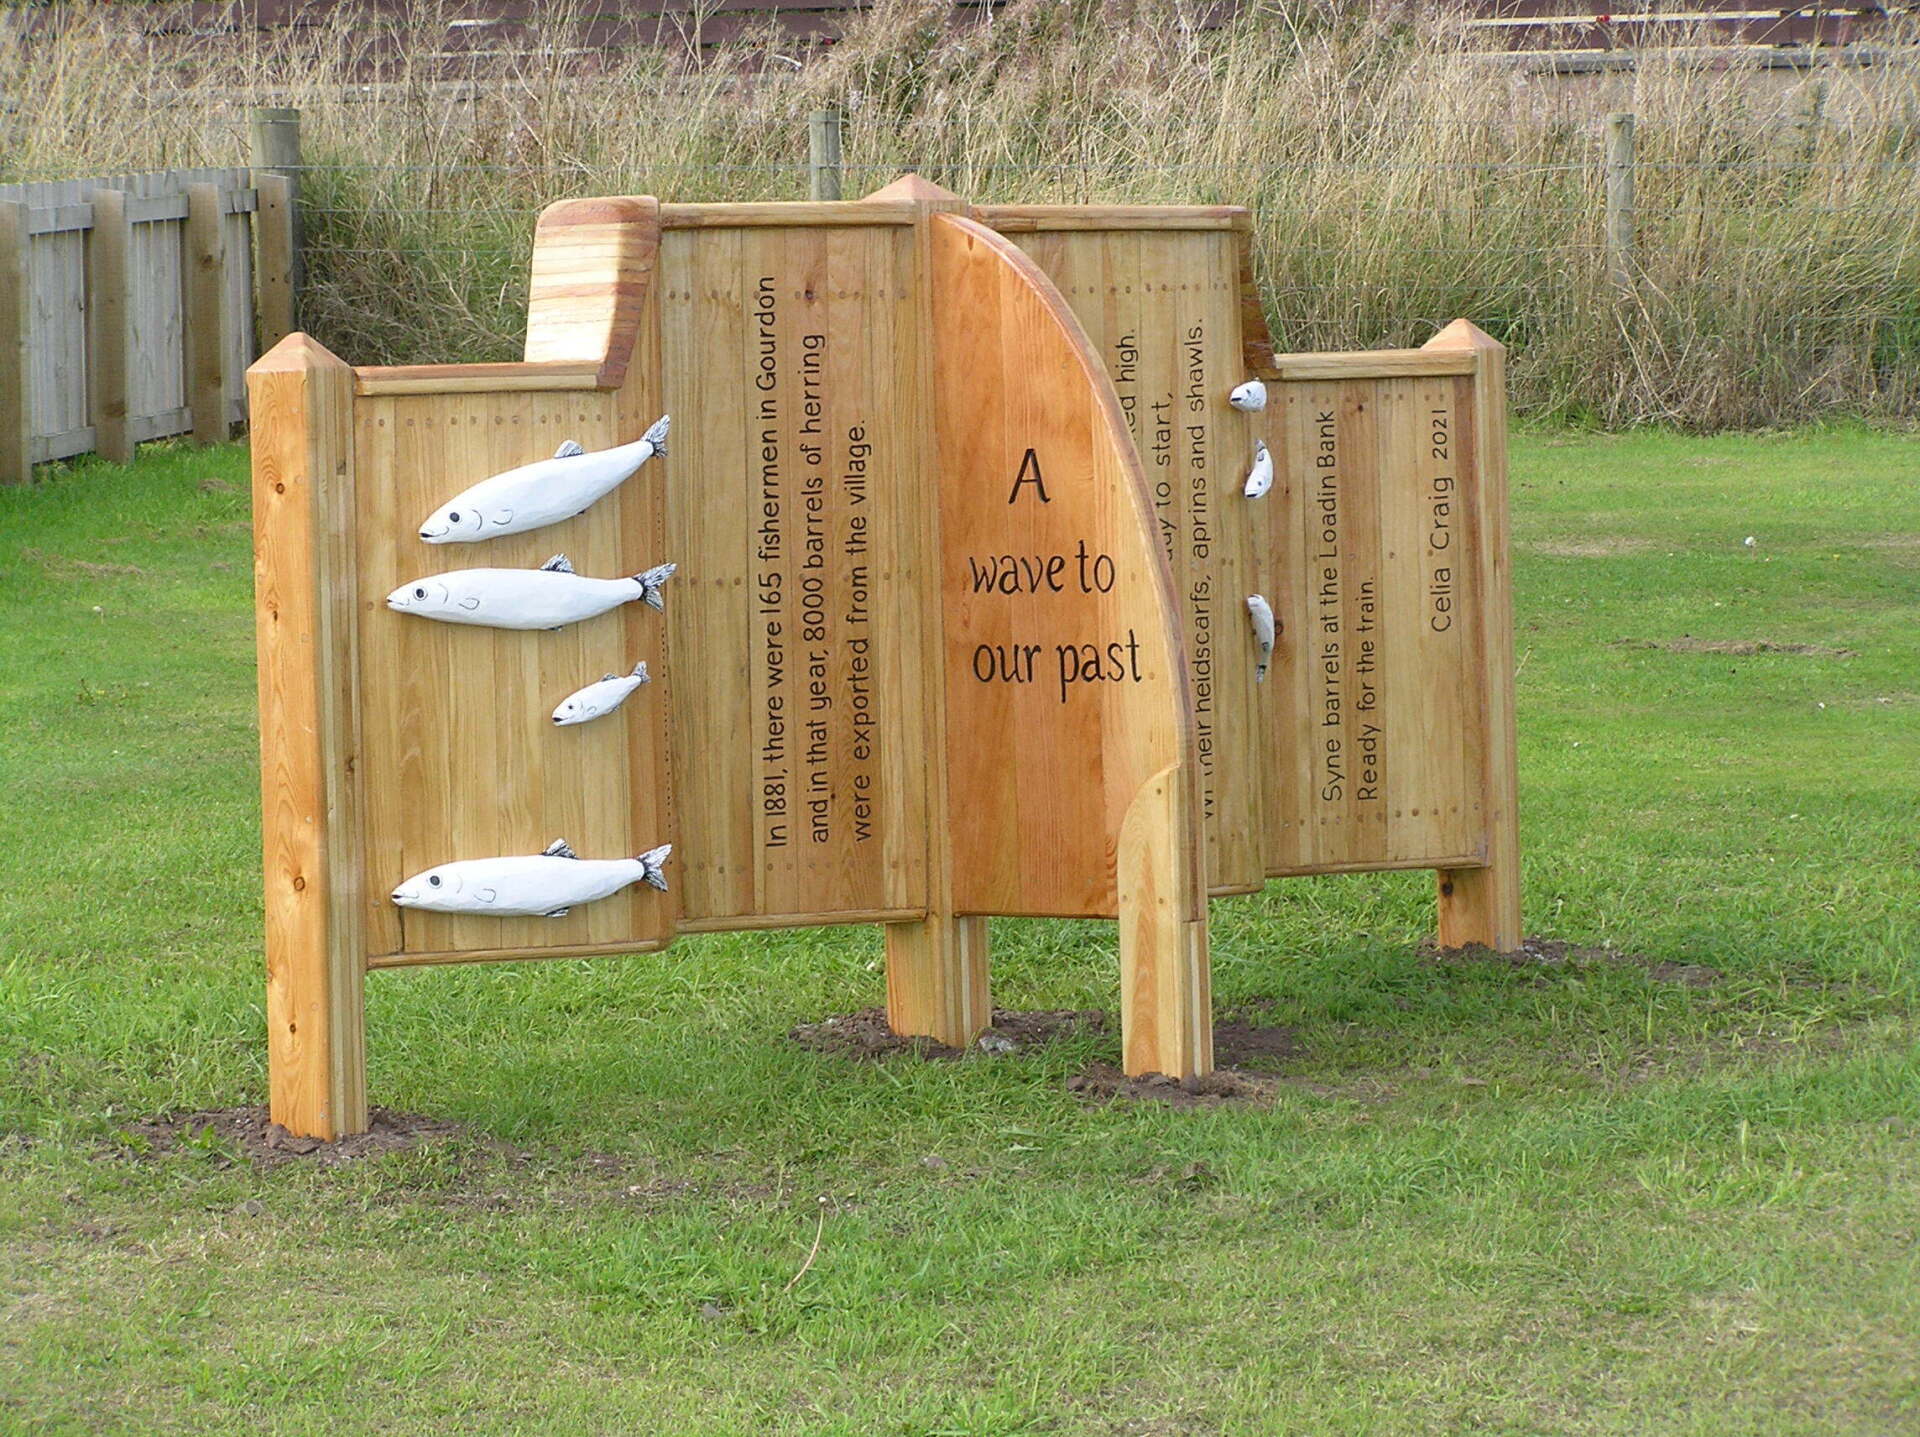 Public Art sculpture made from 'Grown in Britain' wood.